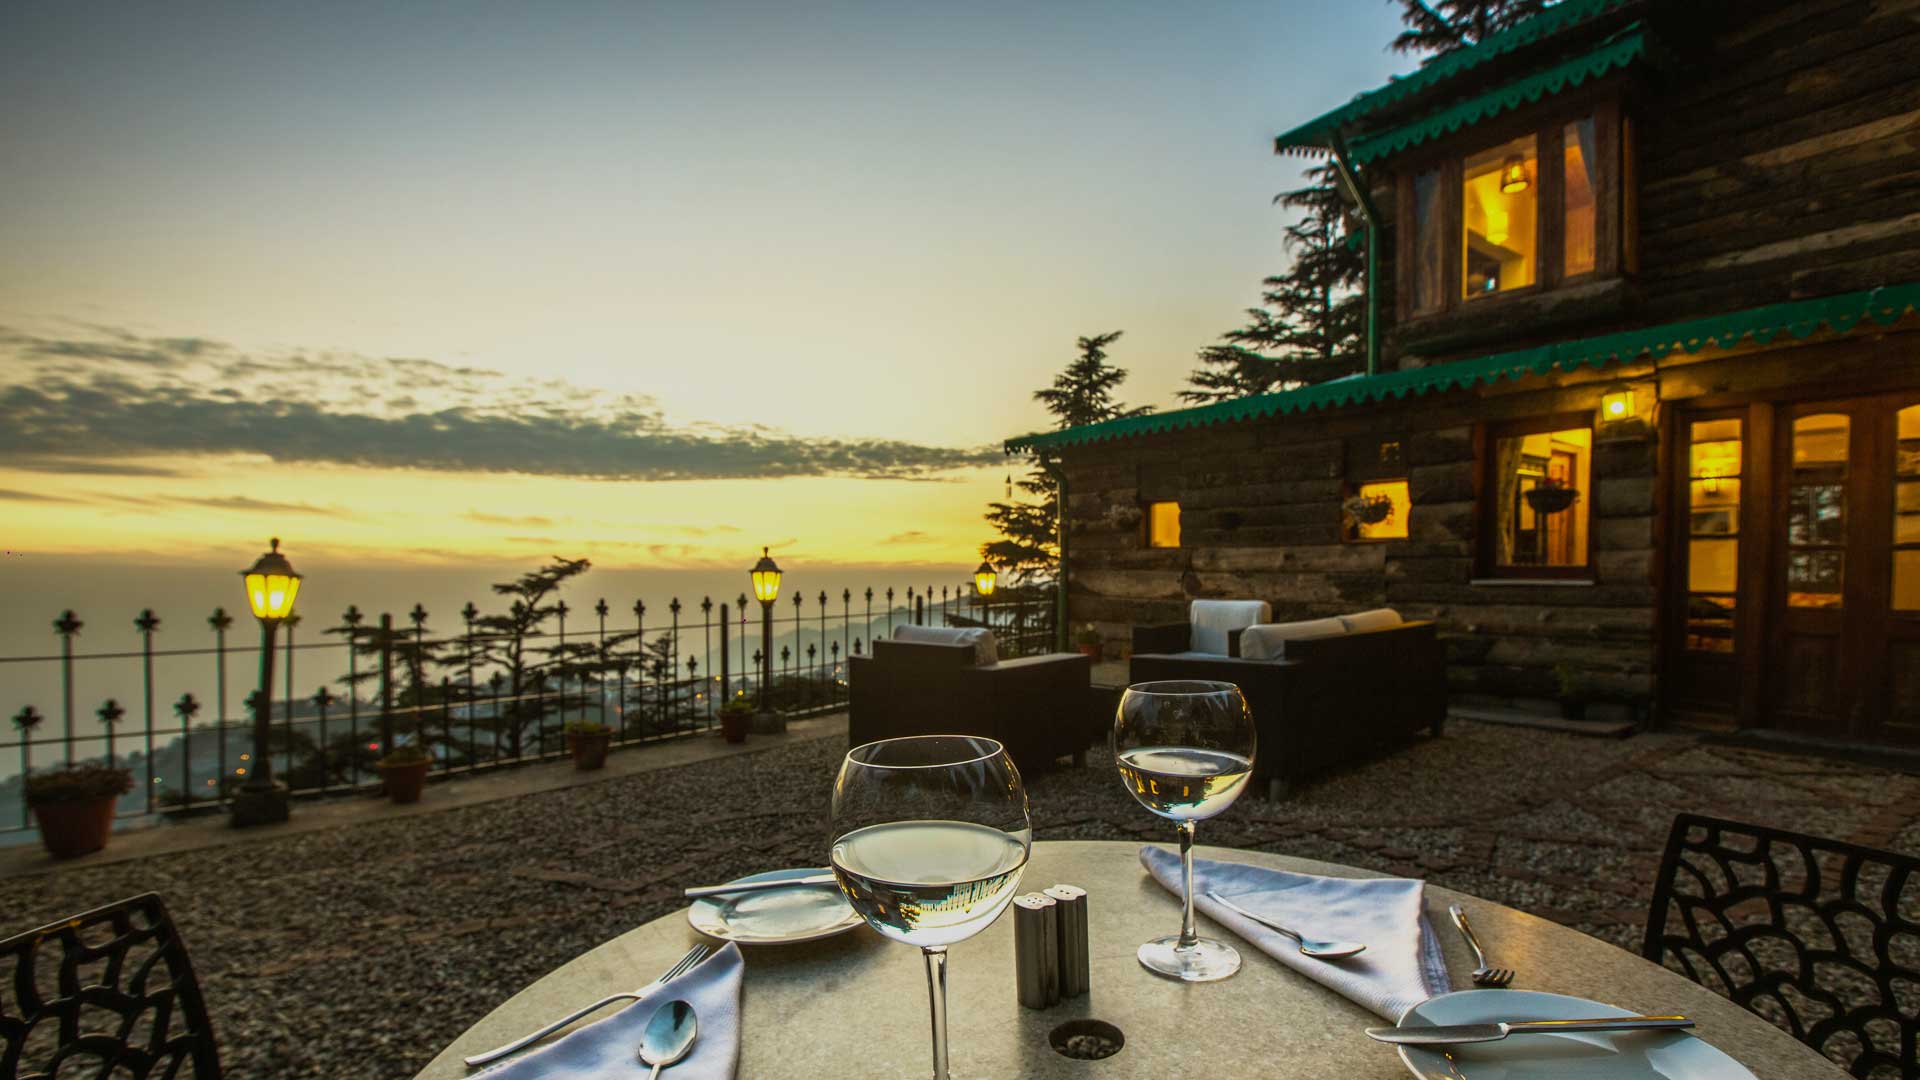 Situated in the heart of Landour, Mussorrie